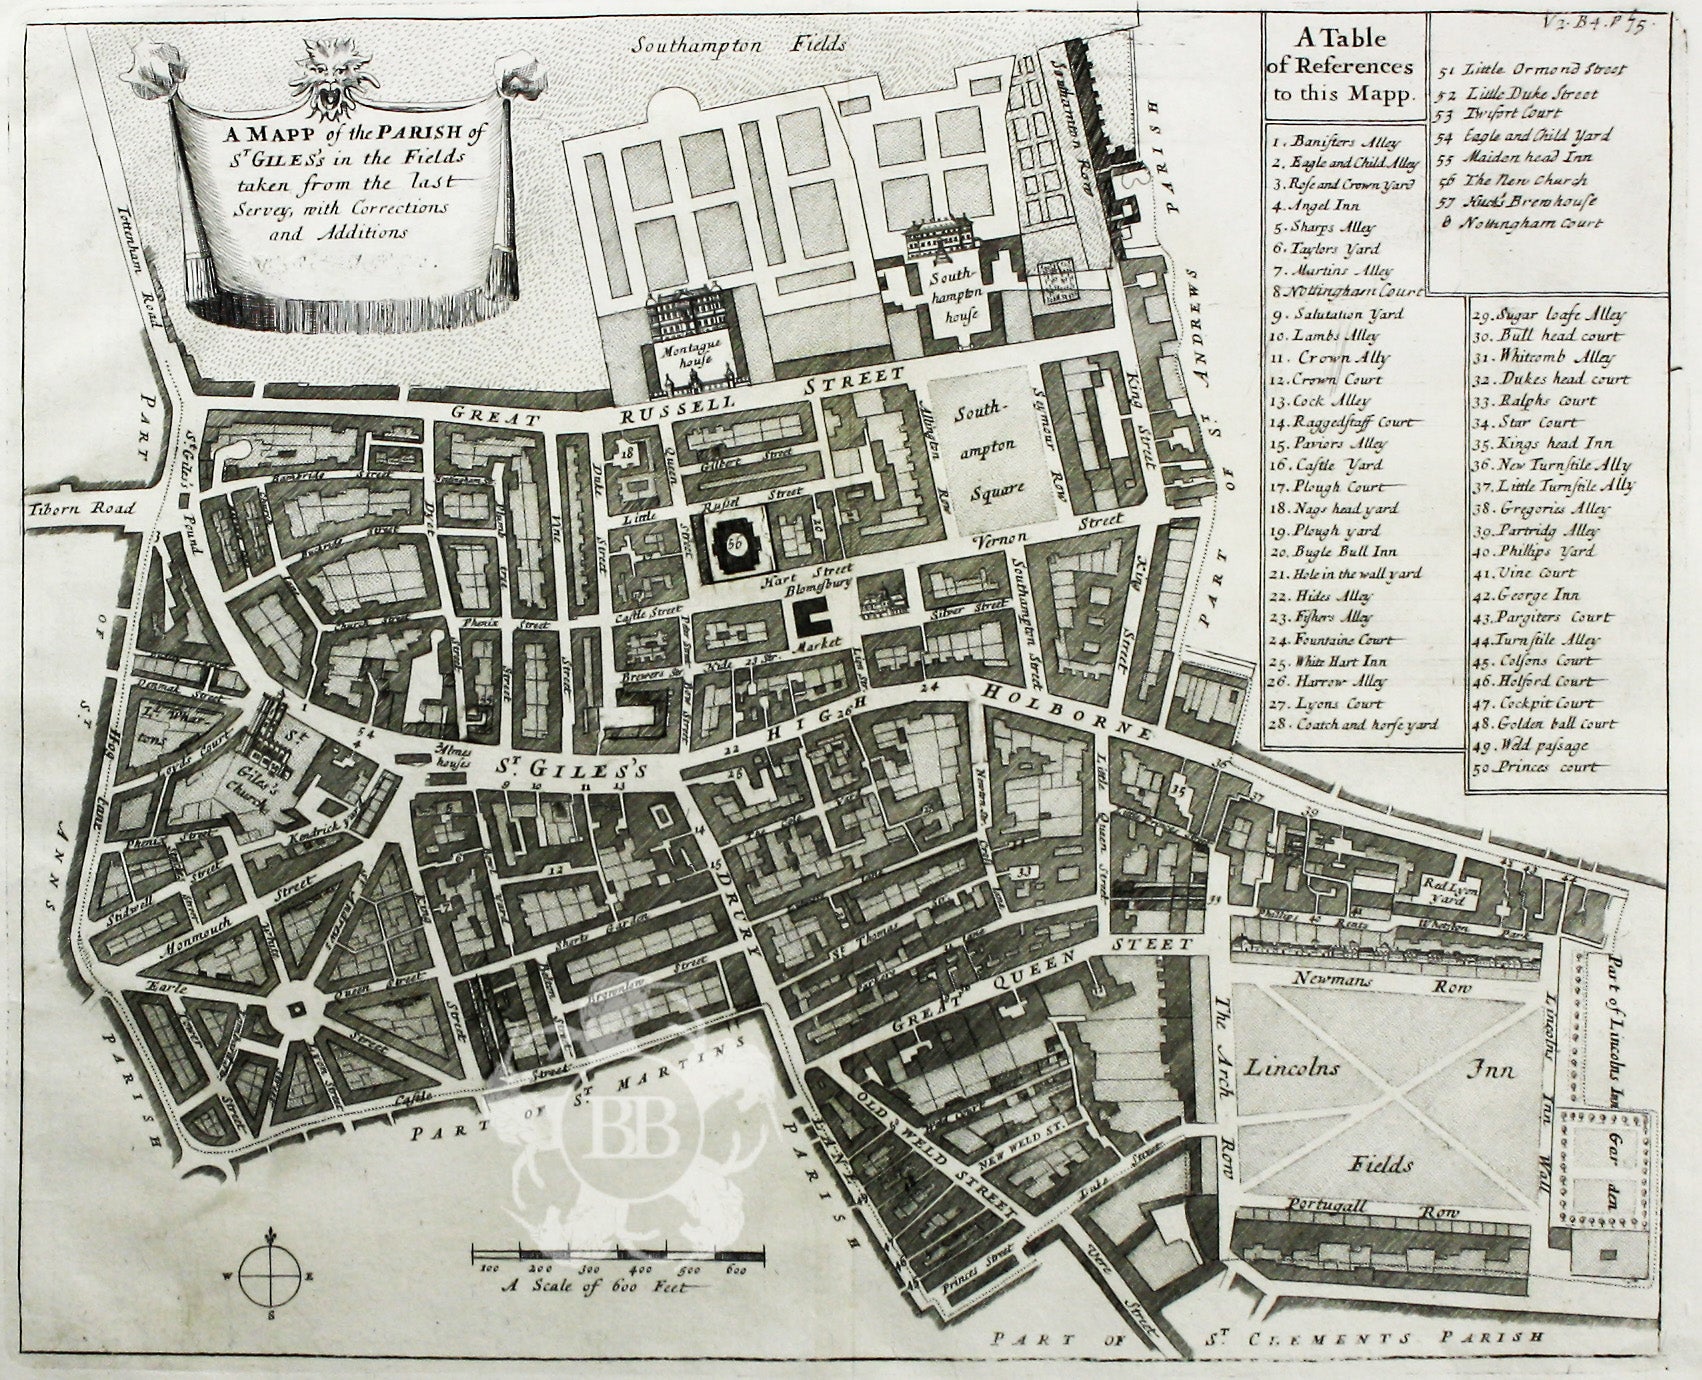 Blome’s Ward Plan of St Giles